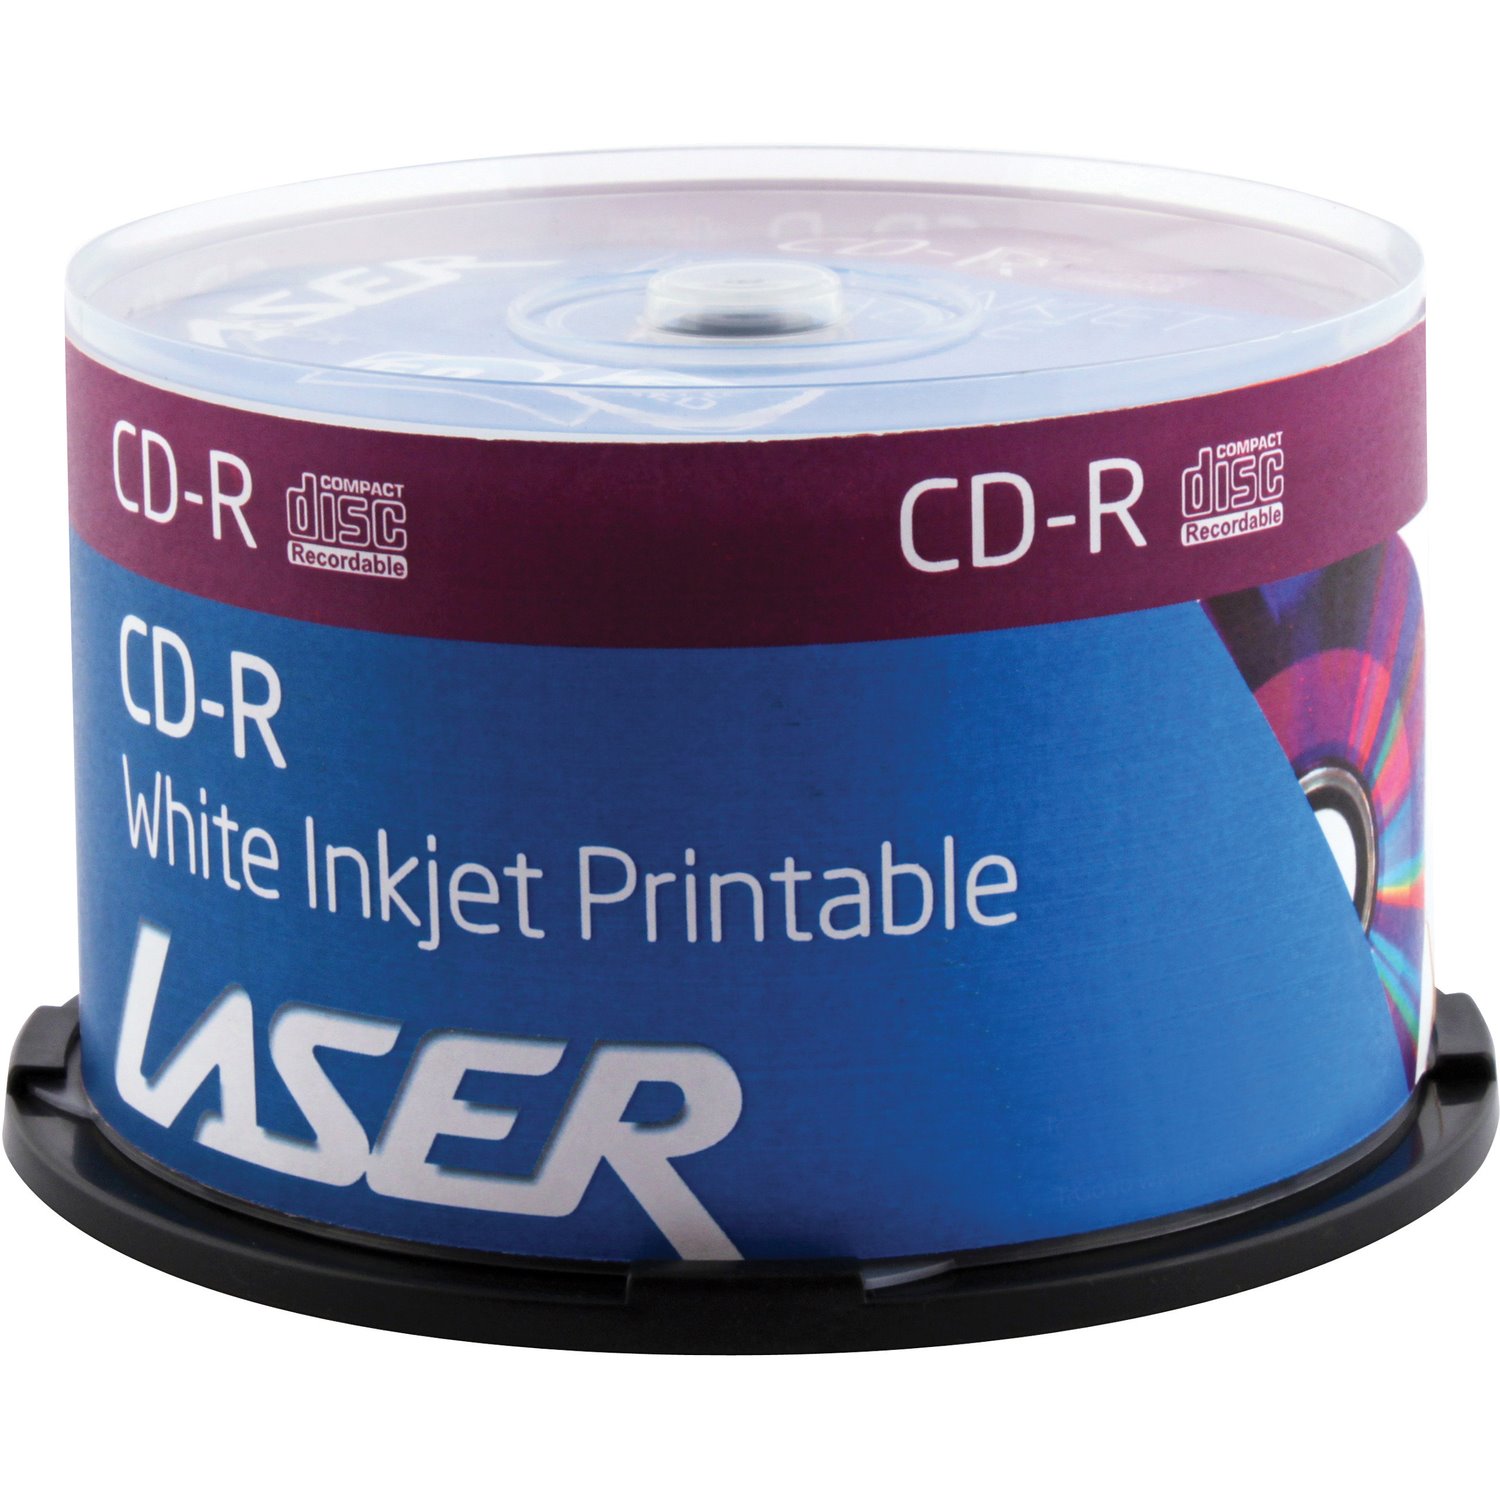 LASER CD Recordable Media - CD-R - 52x - 700 MB - 50 Pack Spindle - White